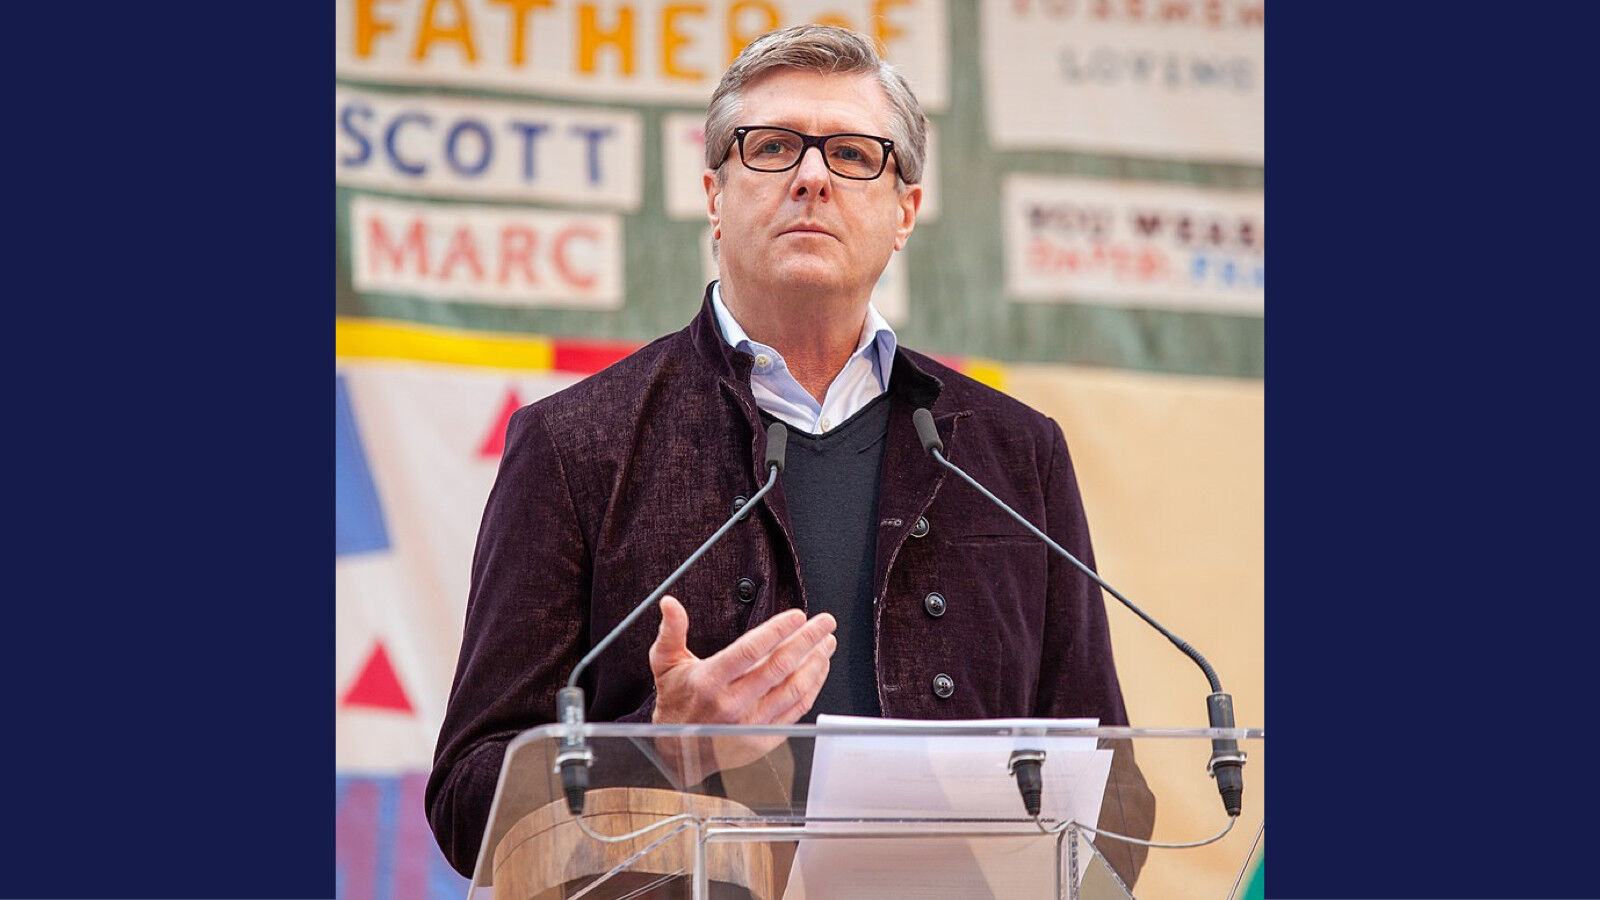 National Basketball Association executive Rick Welts speaks at the National AIDS Memorial on World AIDS Day 2019.